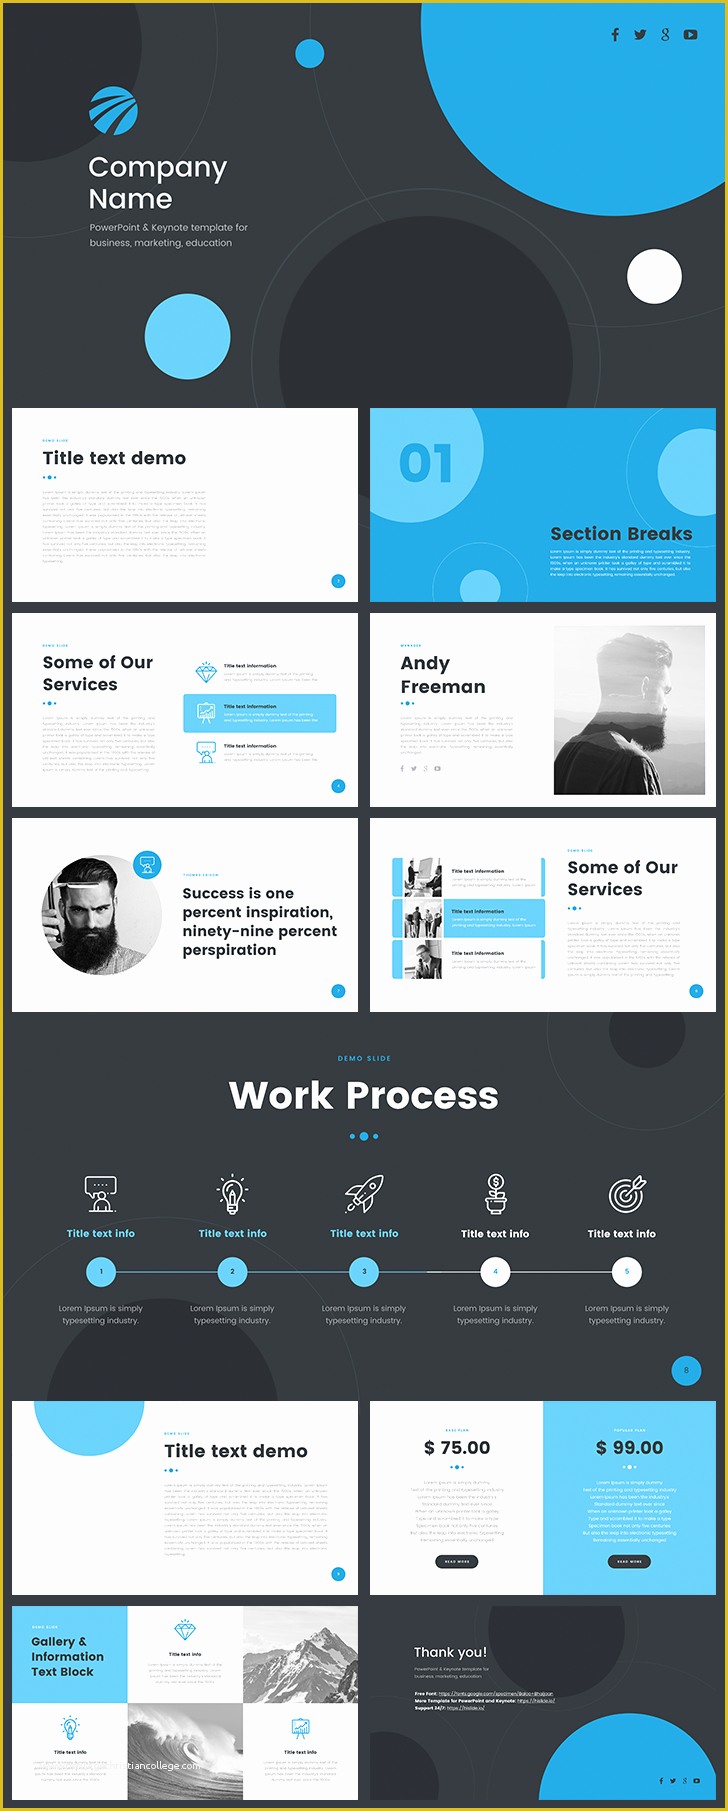 Company Profile Template Powerpoint Free Download Of Free Pany Profile Template Powerpoint Download Free now